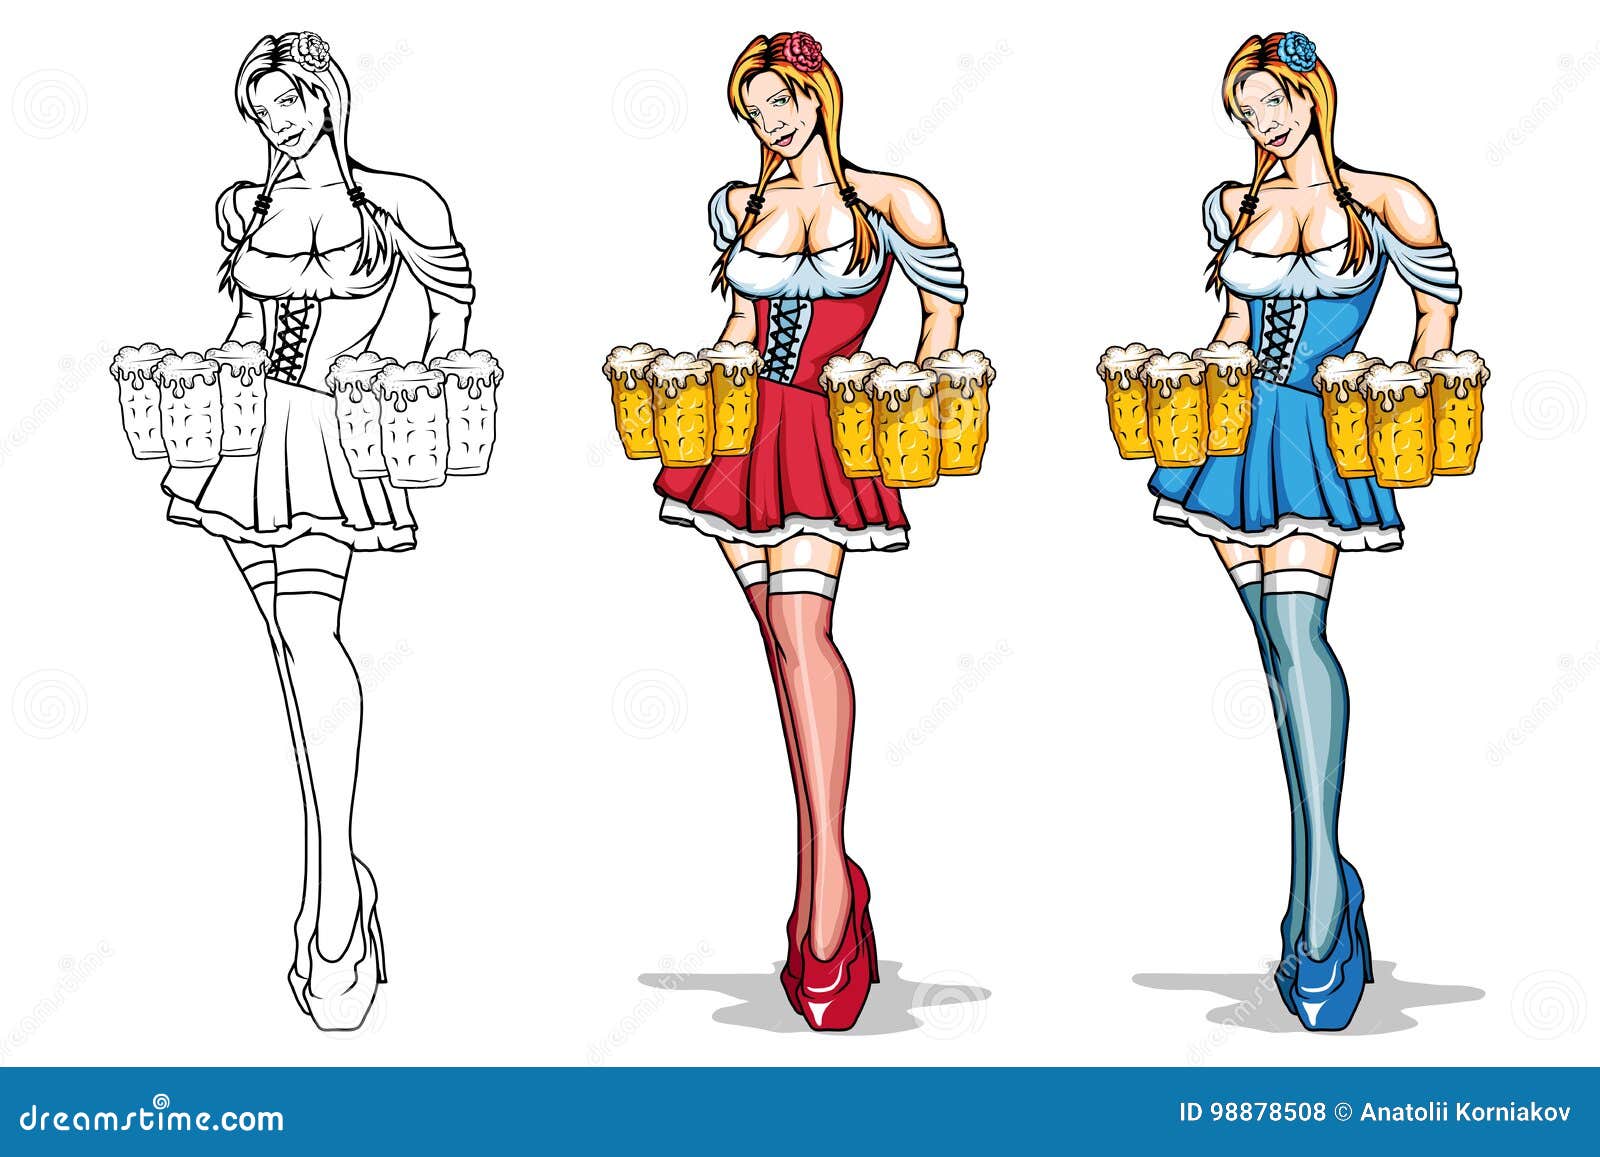 Cartoon Girl with a Glasses of Beer in Her Hands. Stock Vector ...